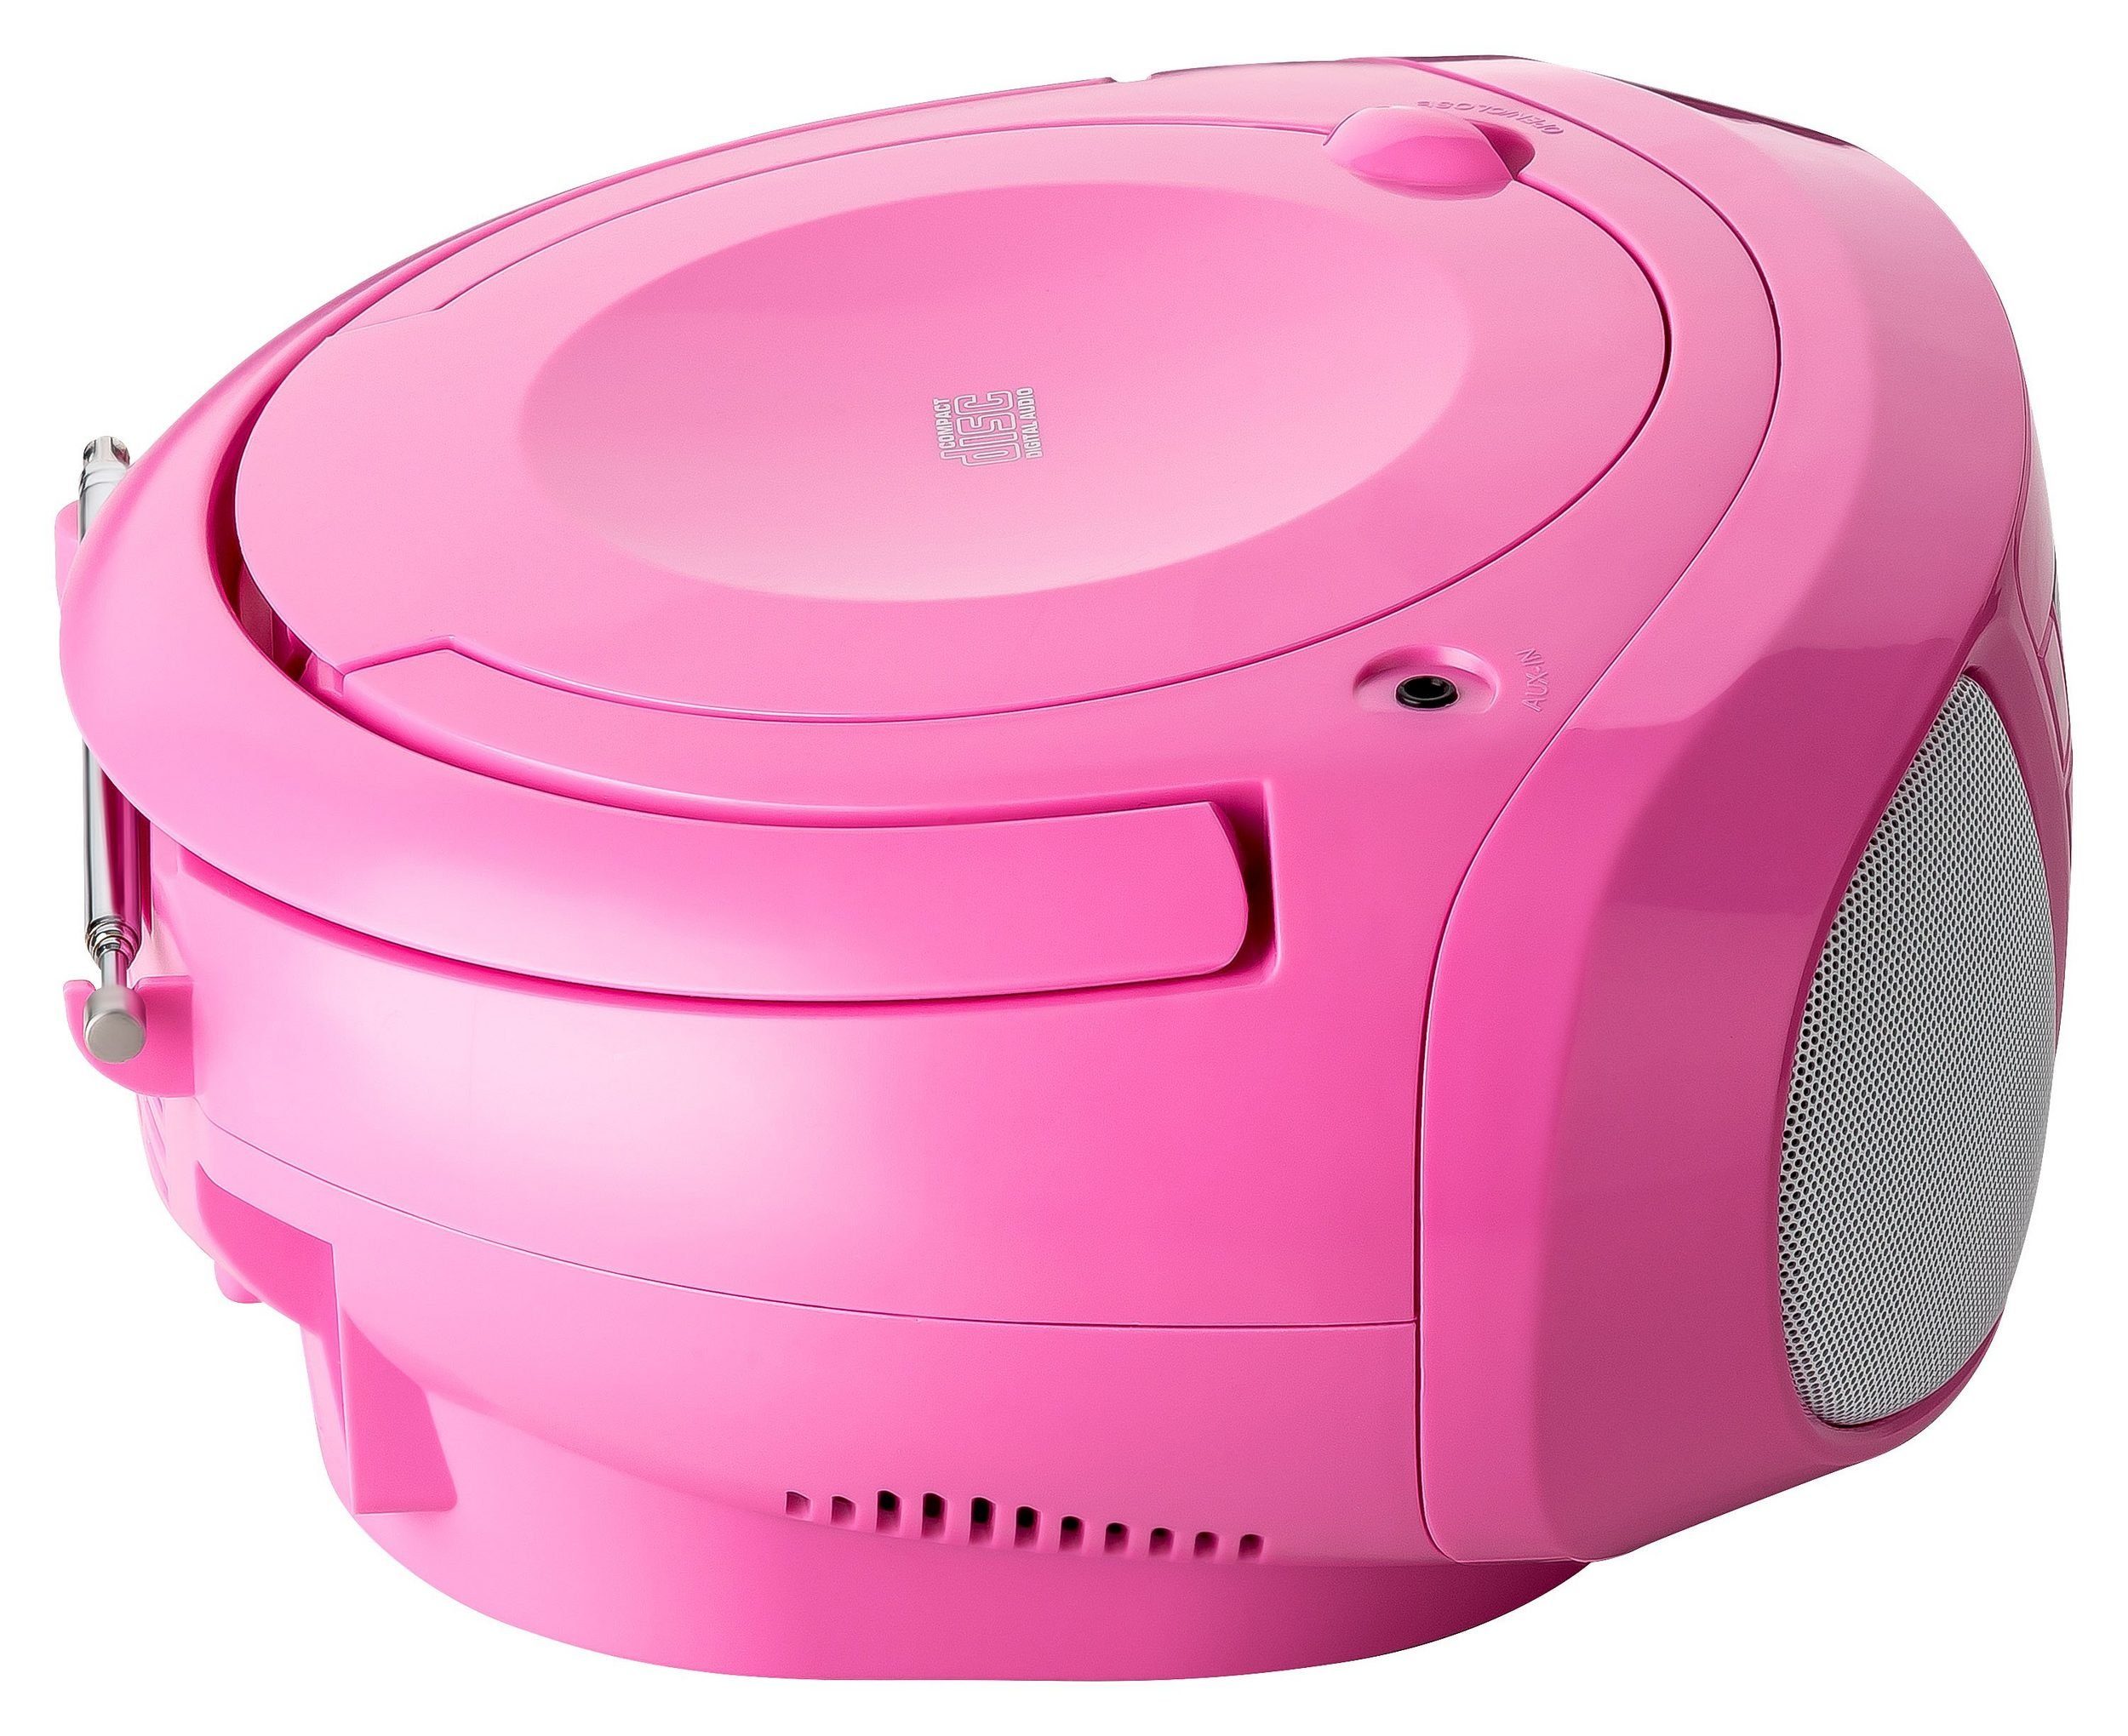 Reflexion CDR614 Boombox (UKW PLL Radio, Tracks) pink (CD: 16,00 20 W, Programmier-Funktion Stereo CD-Player mit Radio